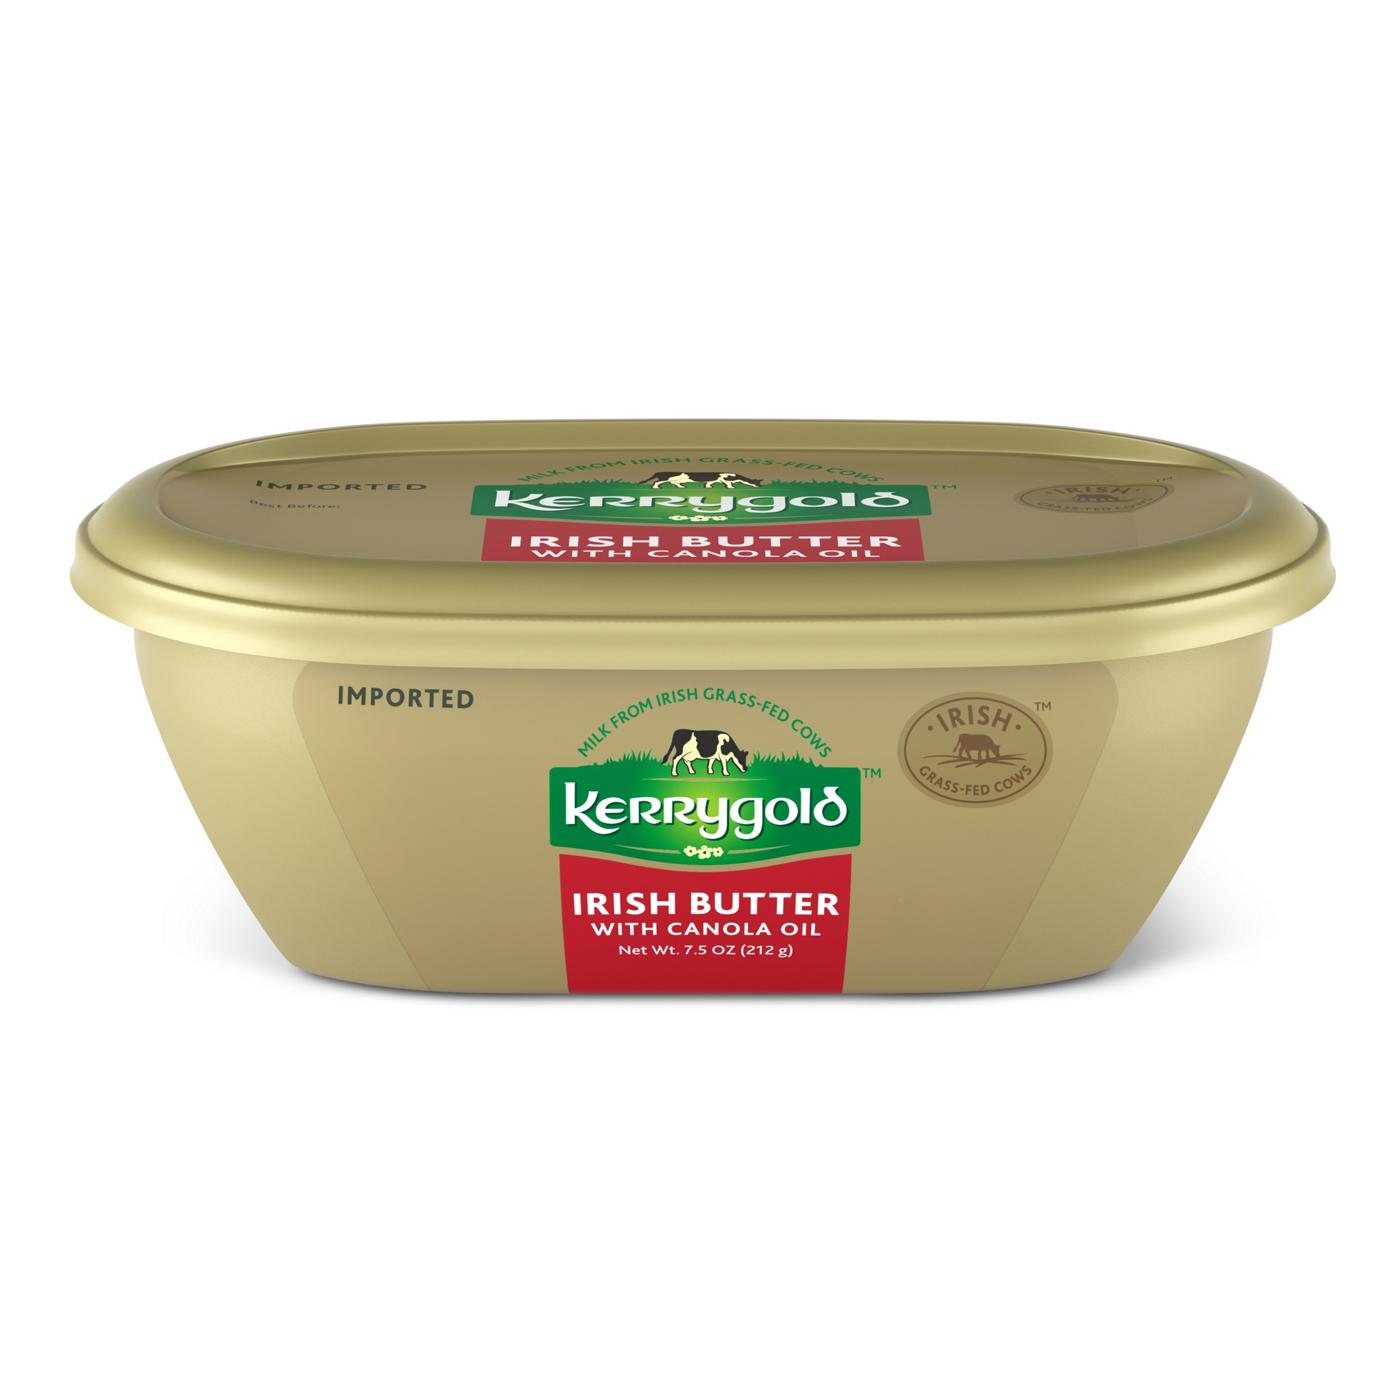 Kerrygold Grass-Fed Pure Irish Butter with Canola Oil; image 1 of 2